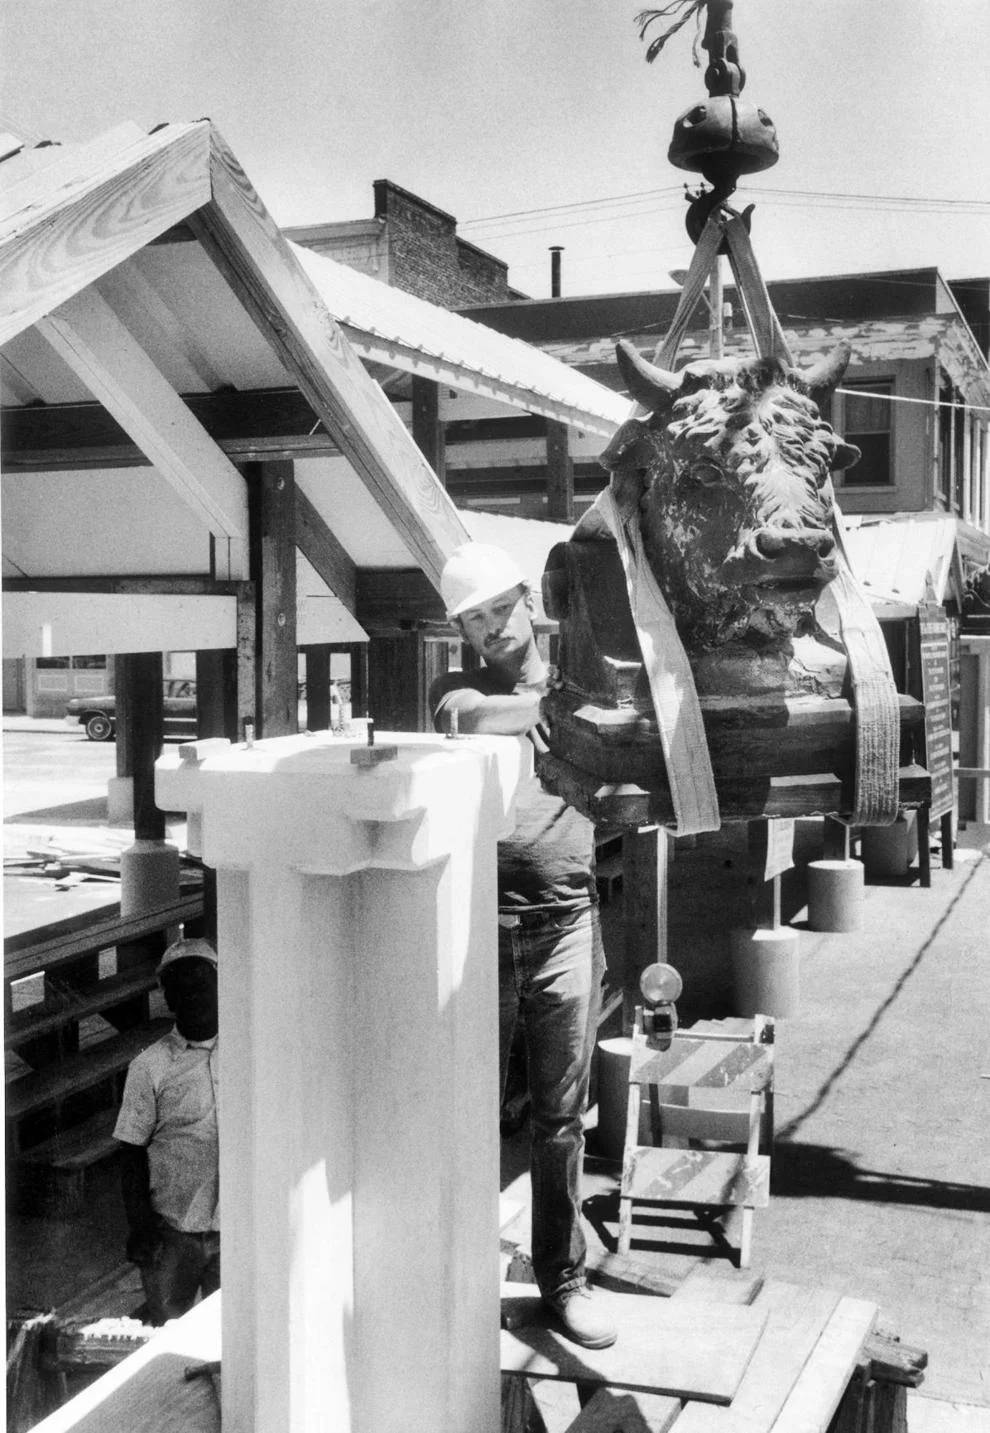 One of two surviving antique terra cotta bull’s heads was prepared for mounting by Ron Kingery at the 17th Street Farmers’ Market in Richmond, 1986